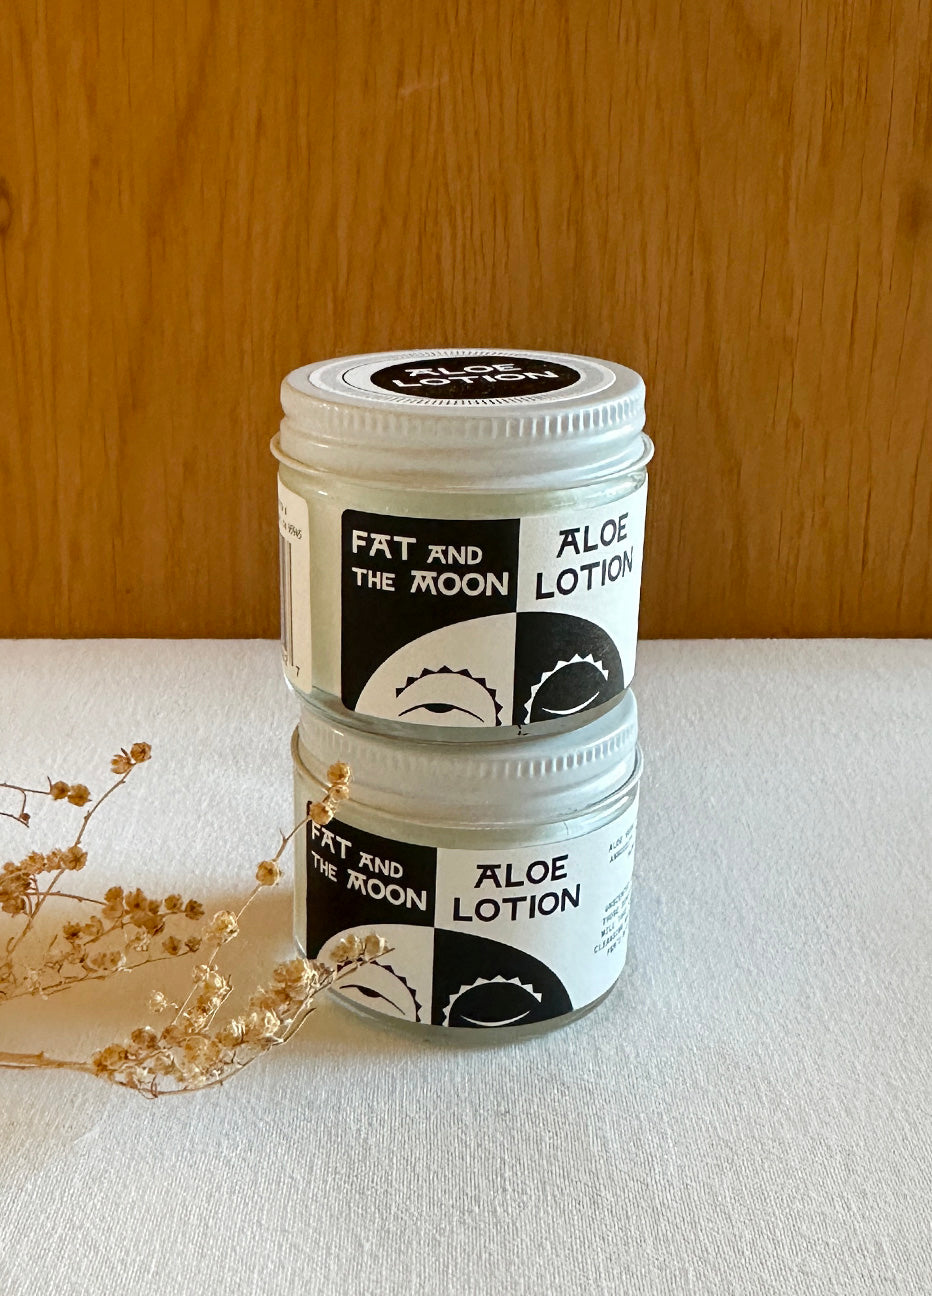 Fat and the Moon Aloe Lotion 2 oz